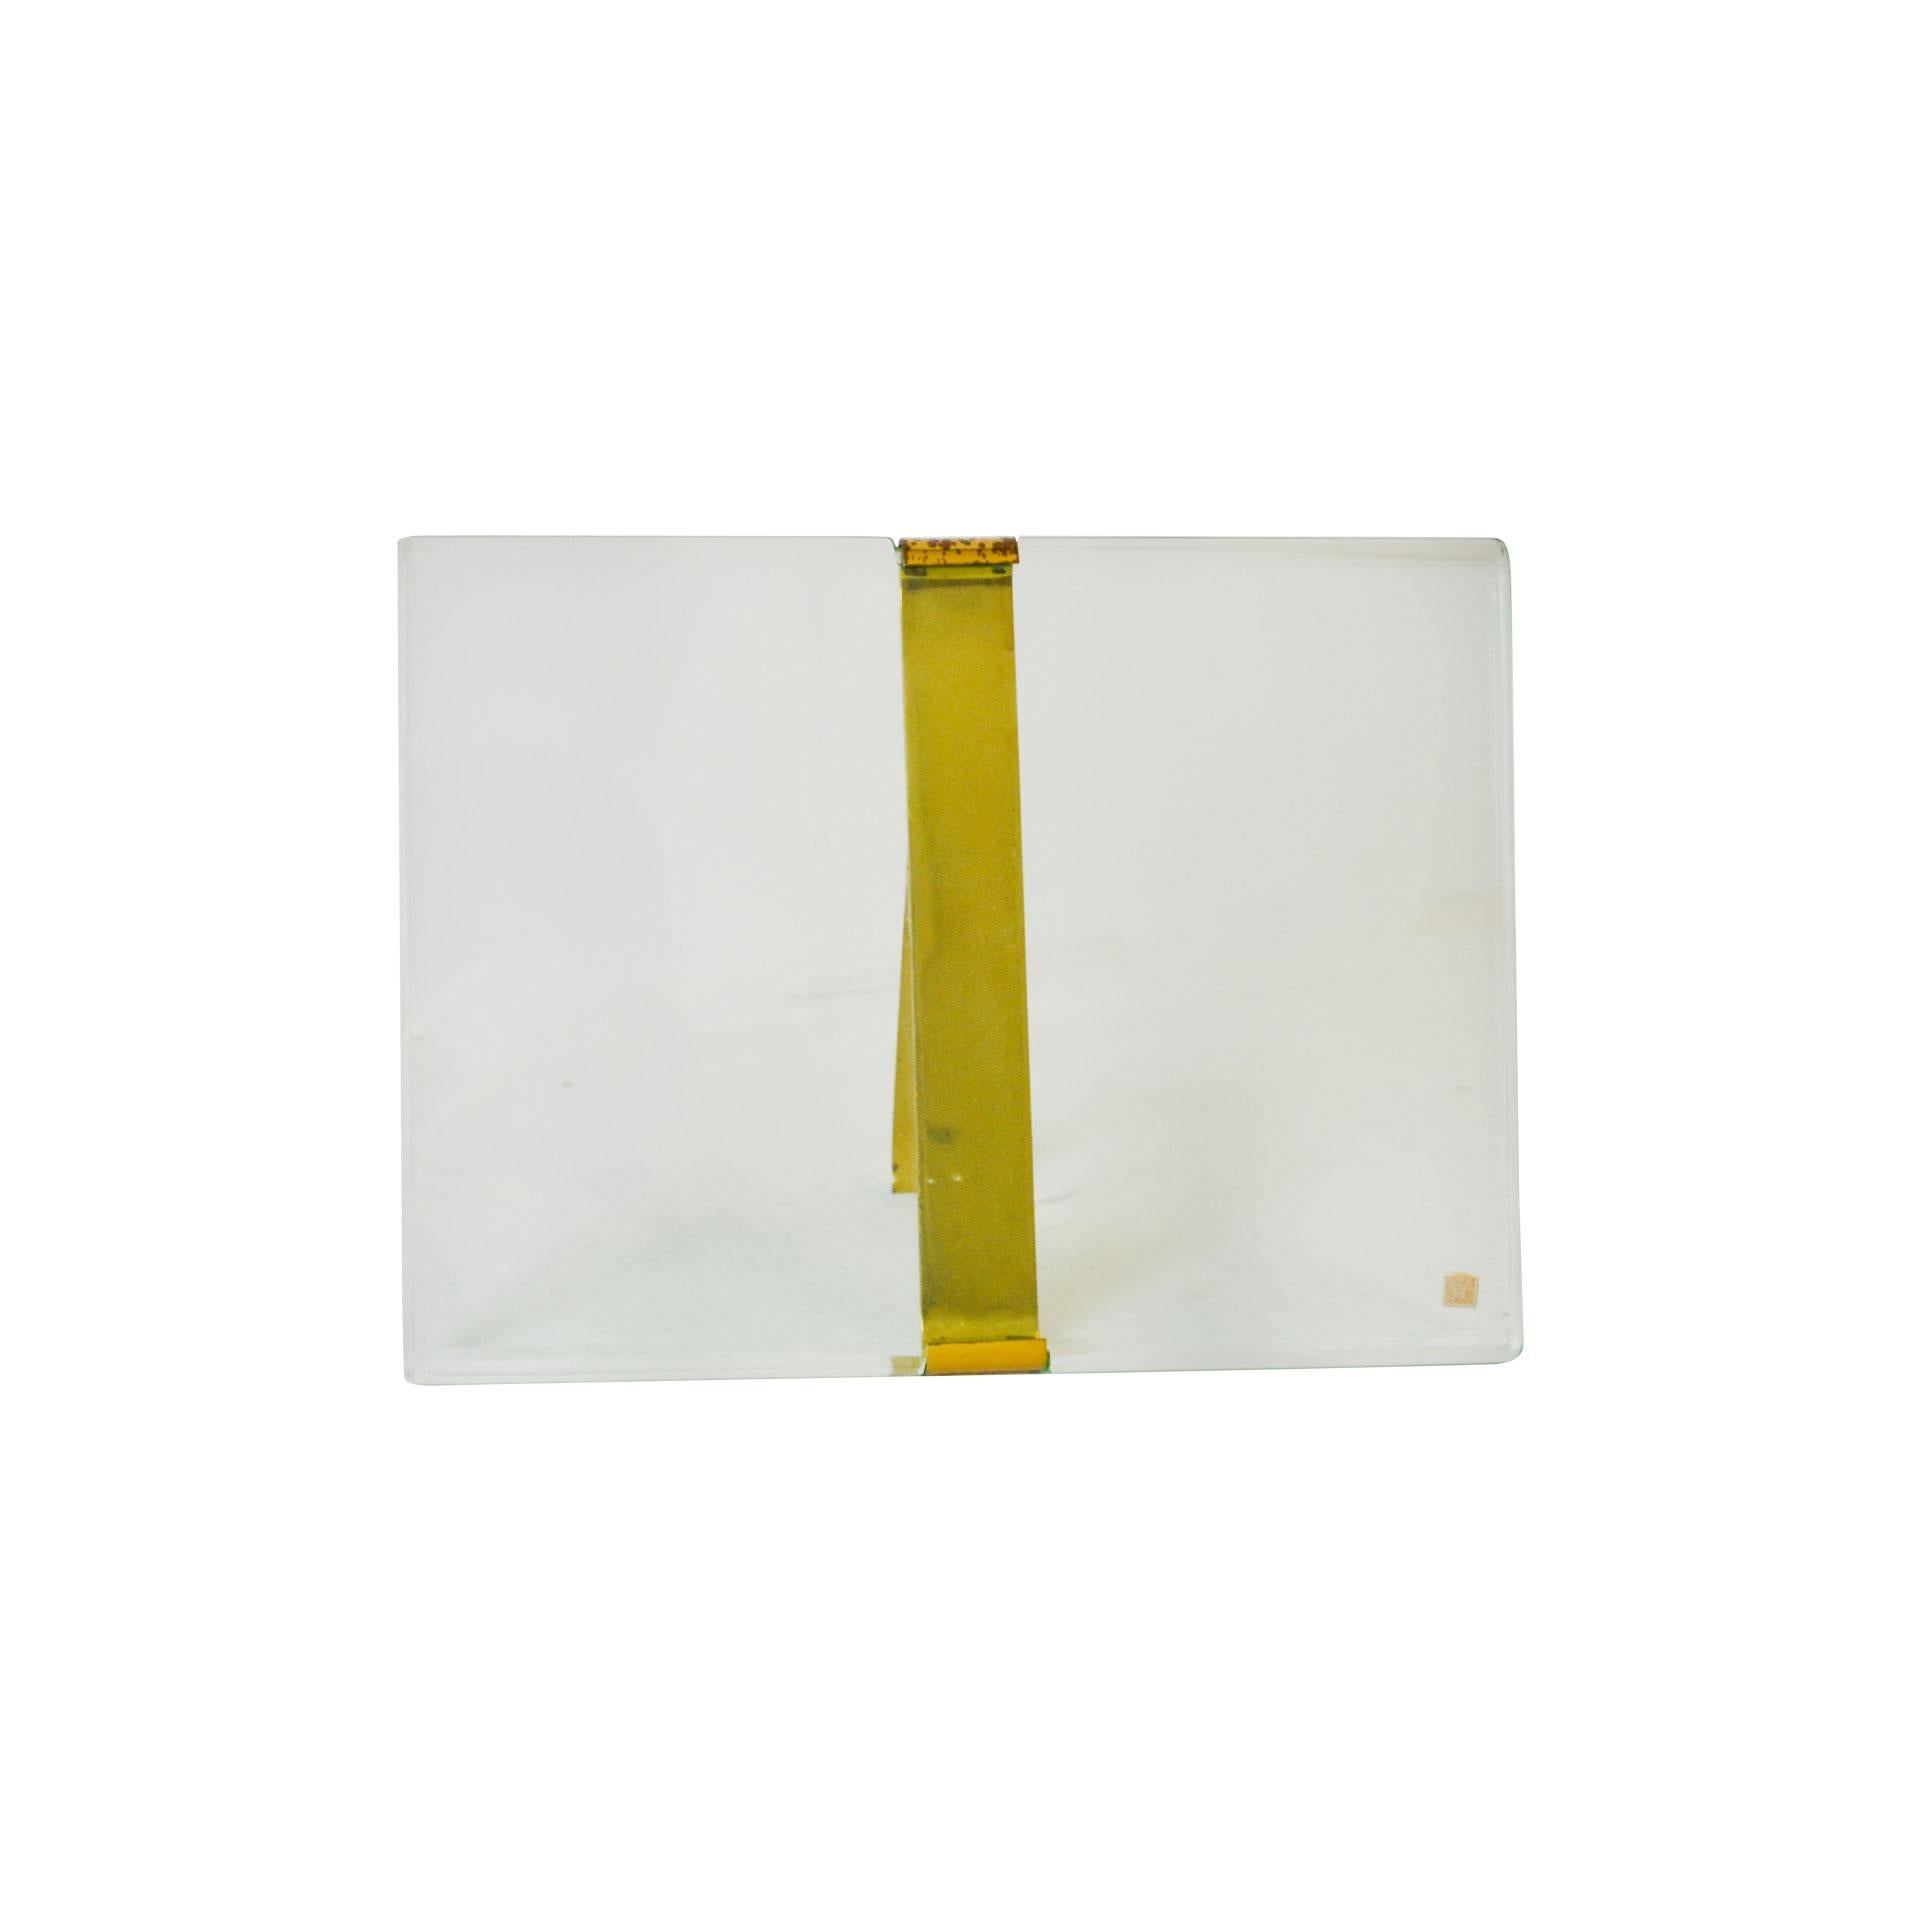 Picture frame model n. 1371 designed by Max Ingrand for Fontana Arte in 1960s. The picture frame is in glass and brass, with patina of time especially on the brass detail. The picture frame itself measures: 24 x 18 cm. Presence of brand logo Fontana